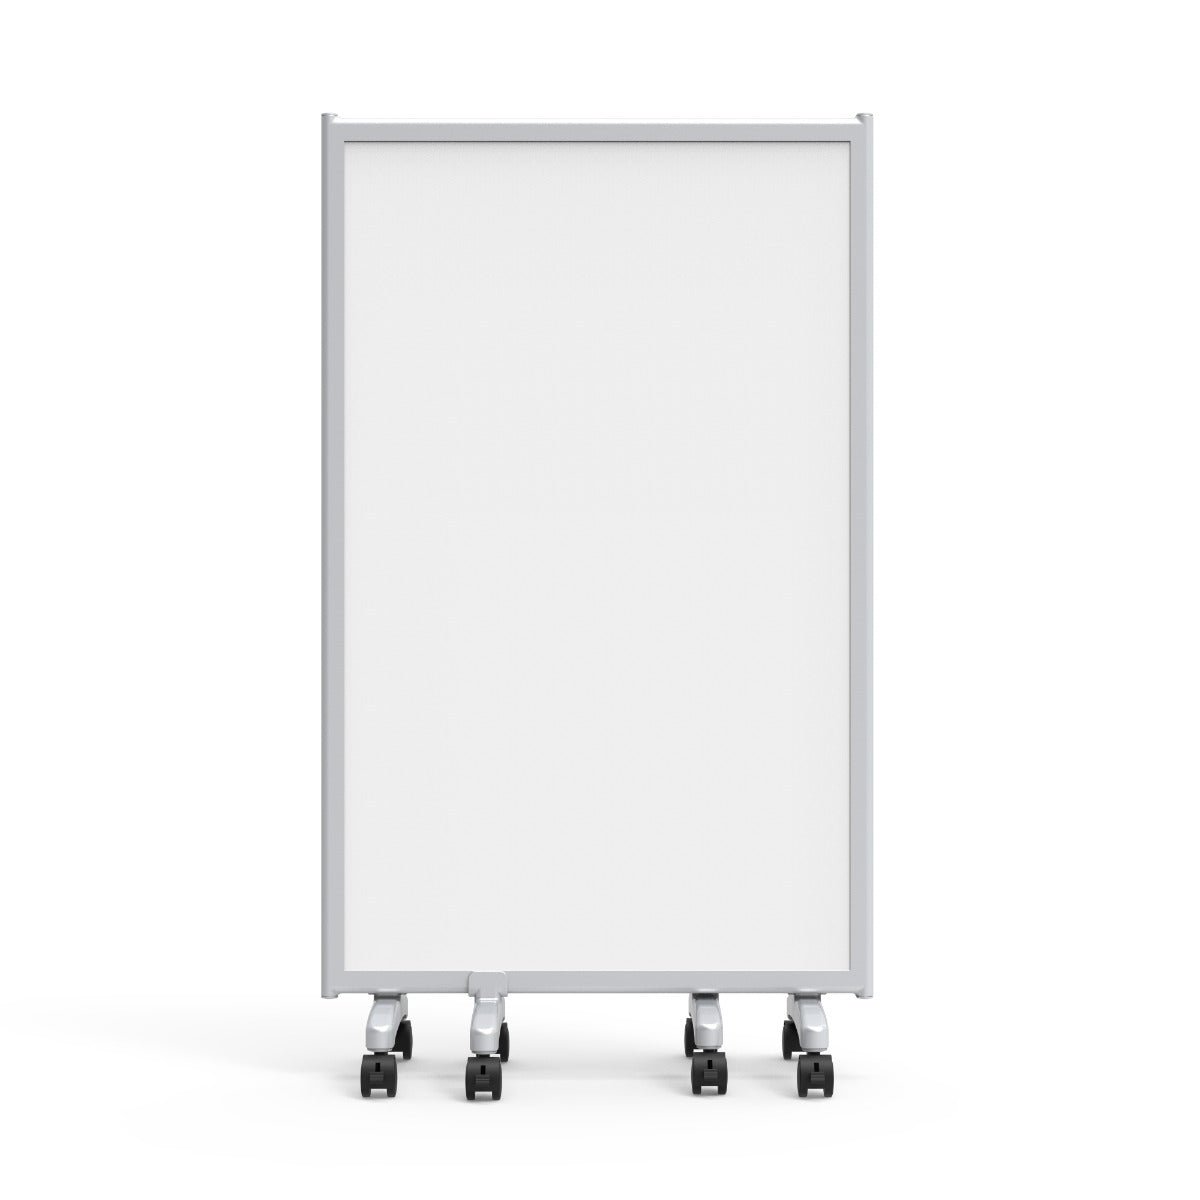 91"W x 52"H Mobile Whiteboard - 3-Panel Folding Room Divider Magnetic dry erase markerboard - Luxor MB9152WW - SchoolOutlet